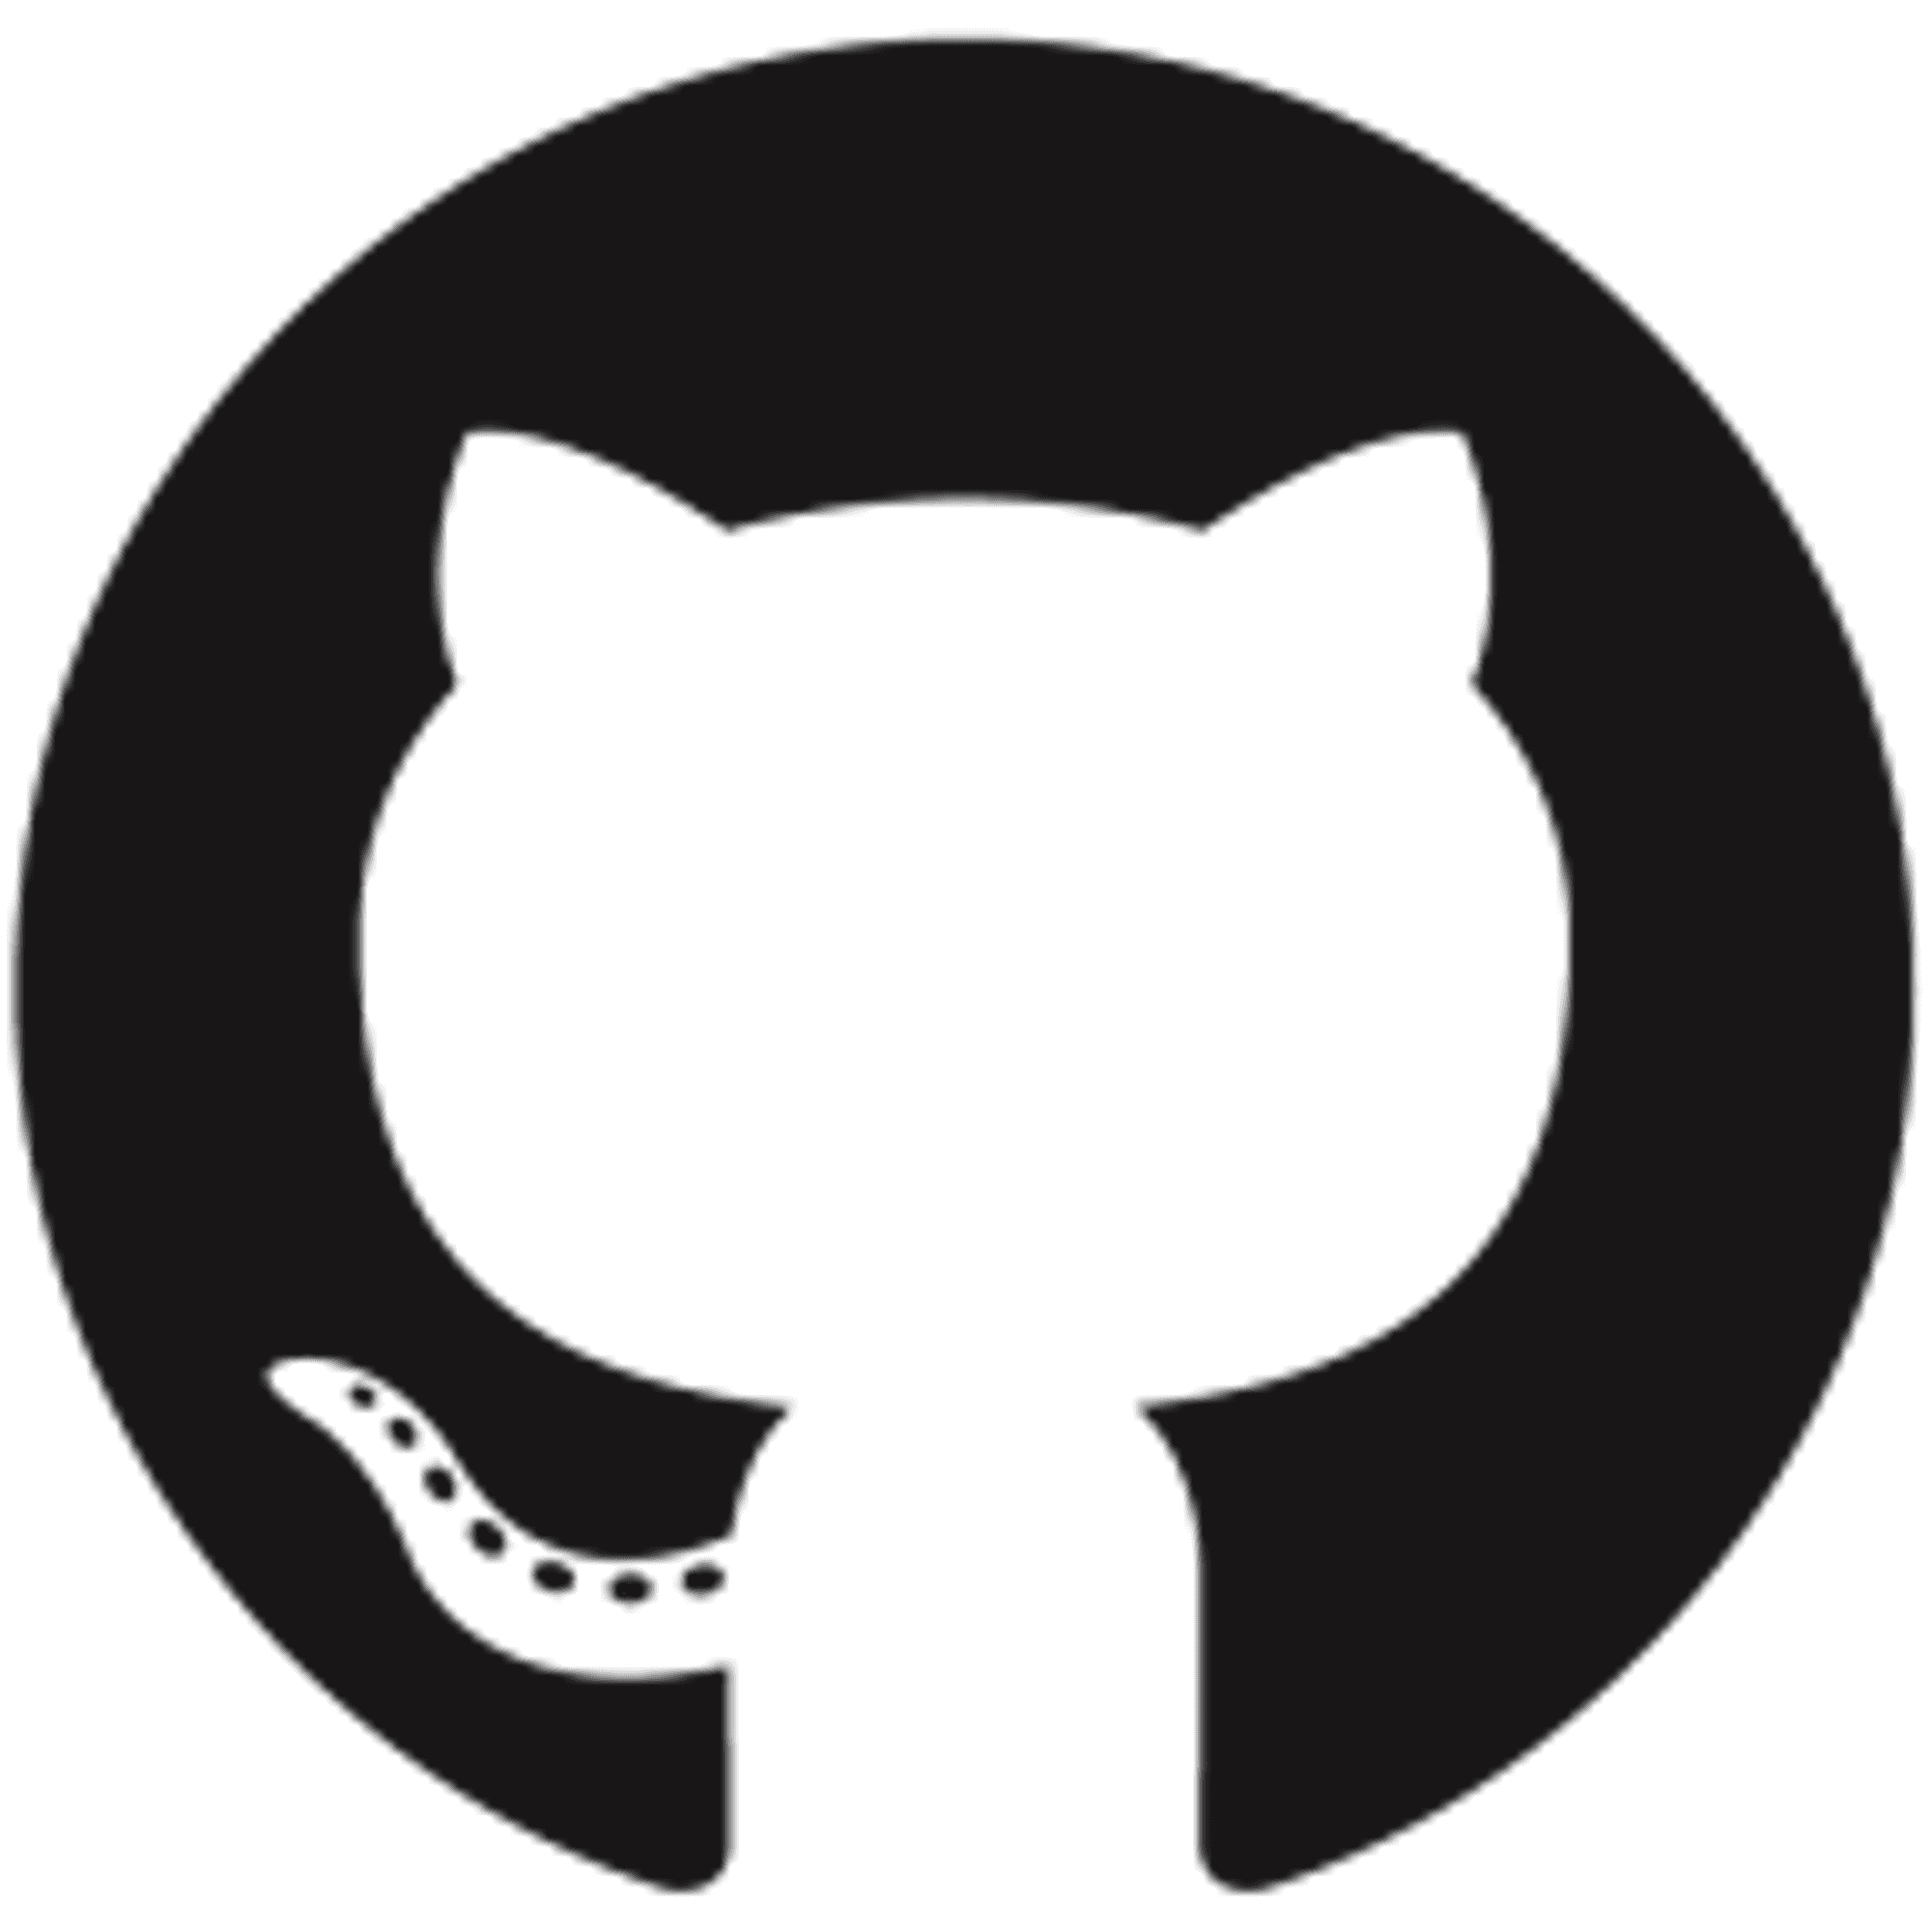 Partitioning GitHub’s relational databases to handle scale